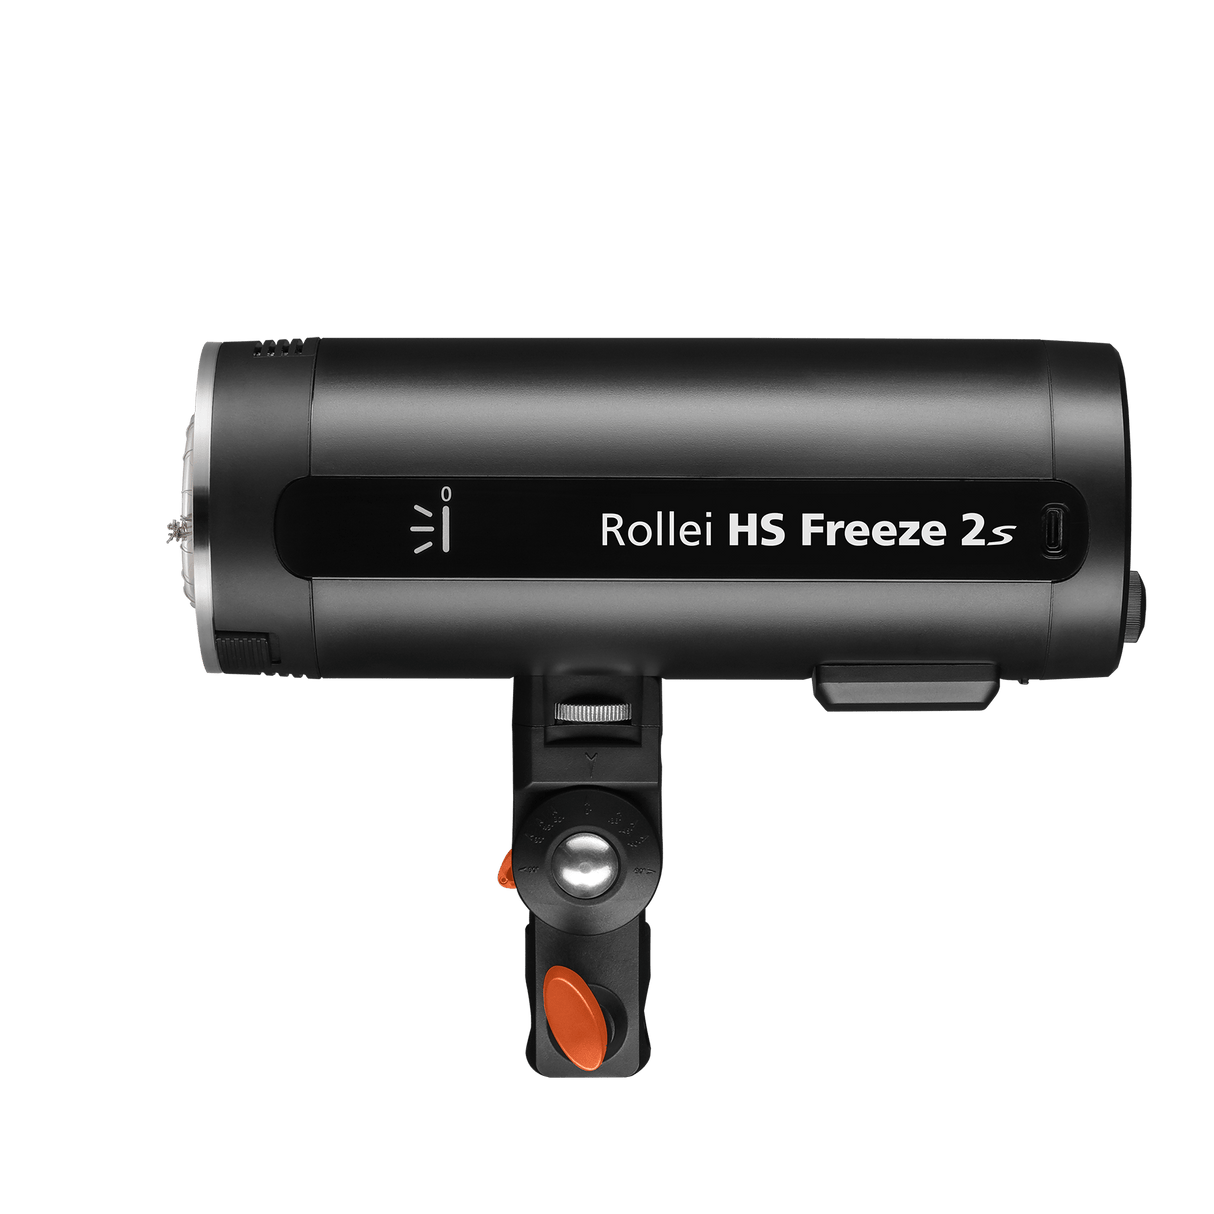 2s with – Freeze flash - battery Rollei studio HS